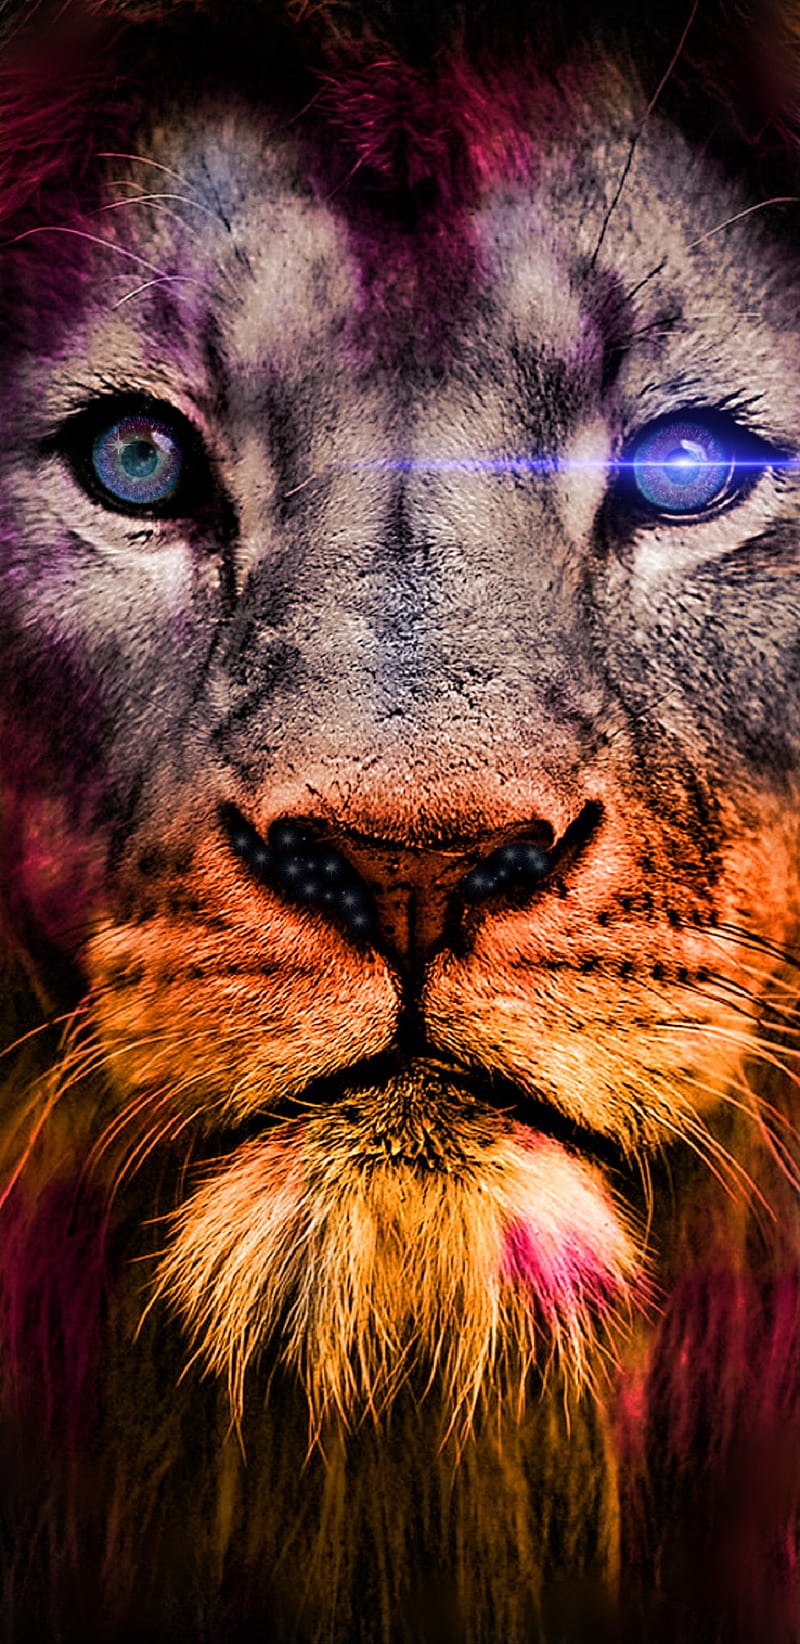 Download wallpaper 1440x2560 lion crown art king of beasts king qhd samsung  galaxy s6 s7 edge note lg g4 hd background